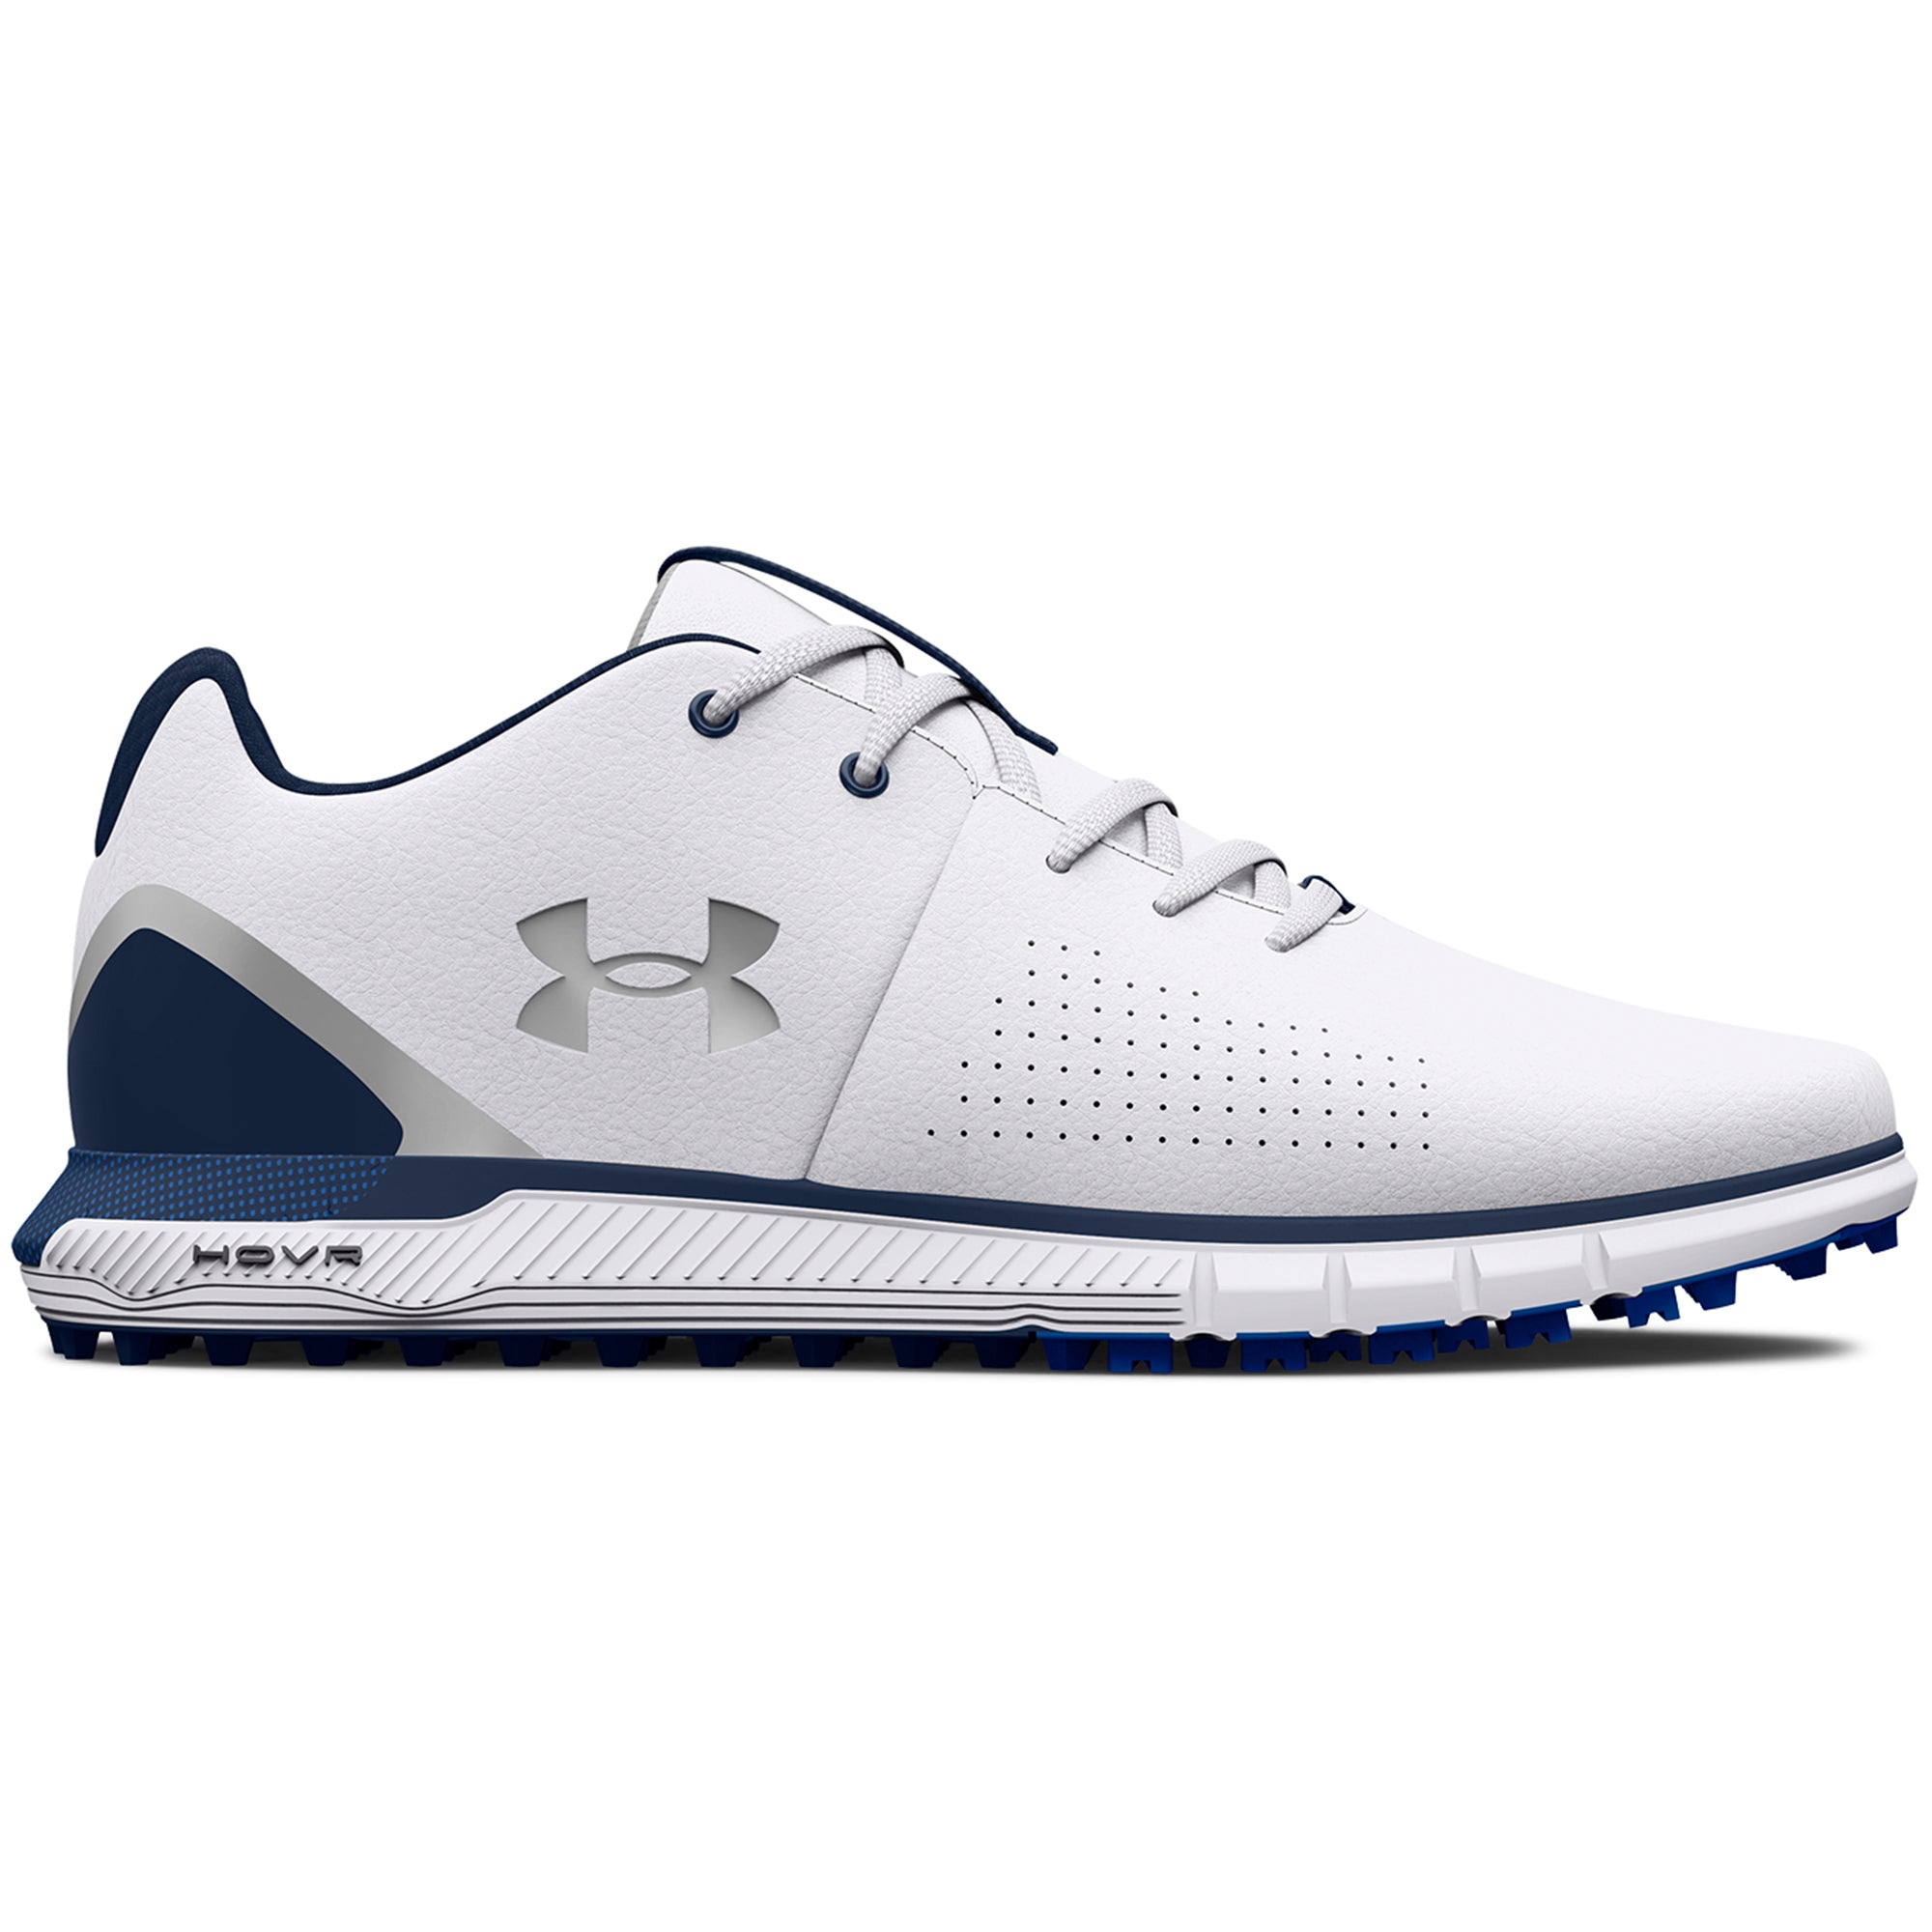 Under Armour Fade SL 2 E Shoes 3026970 White 101 Function18